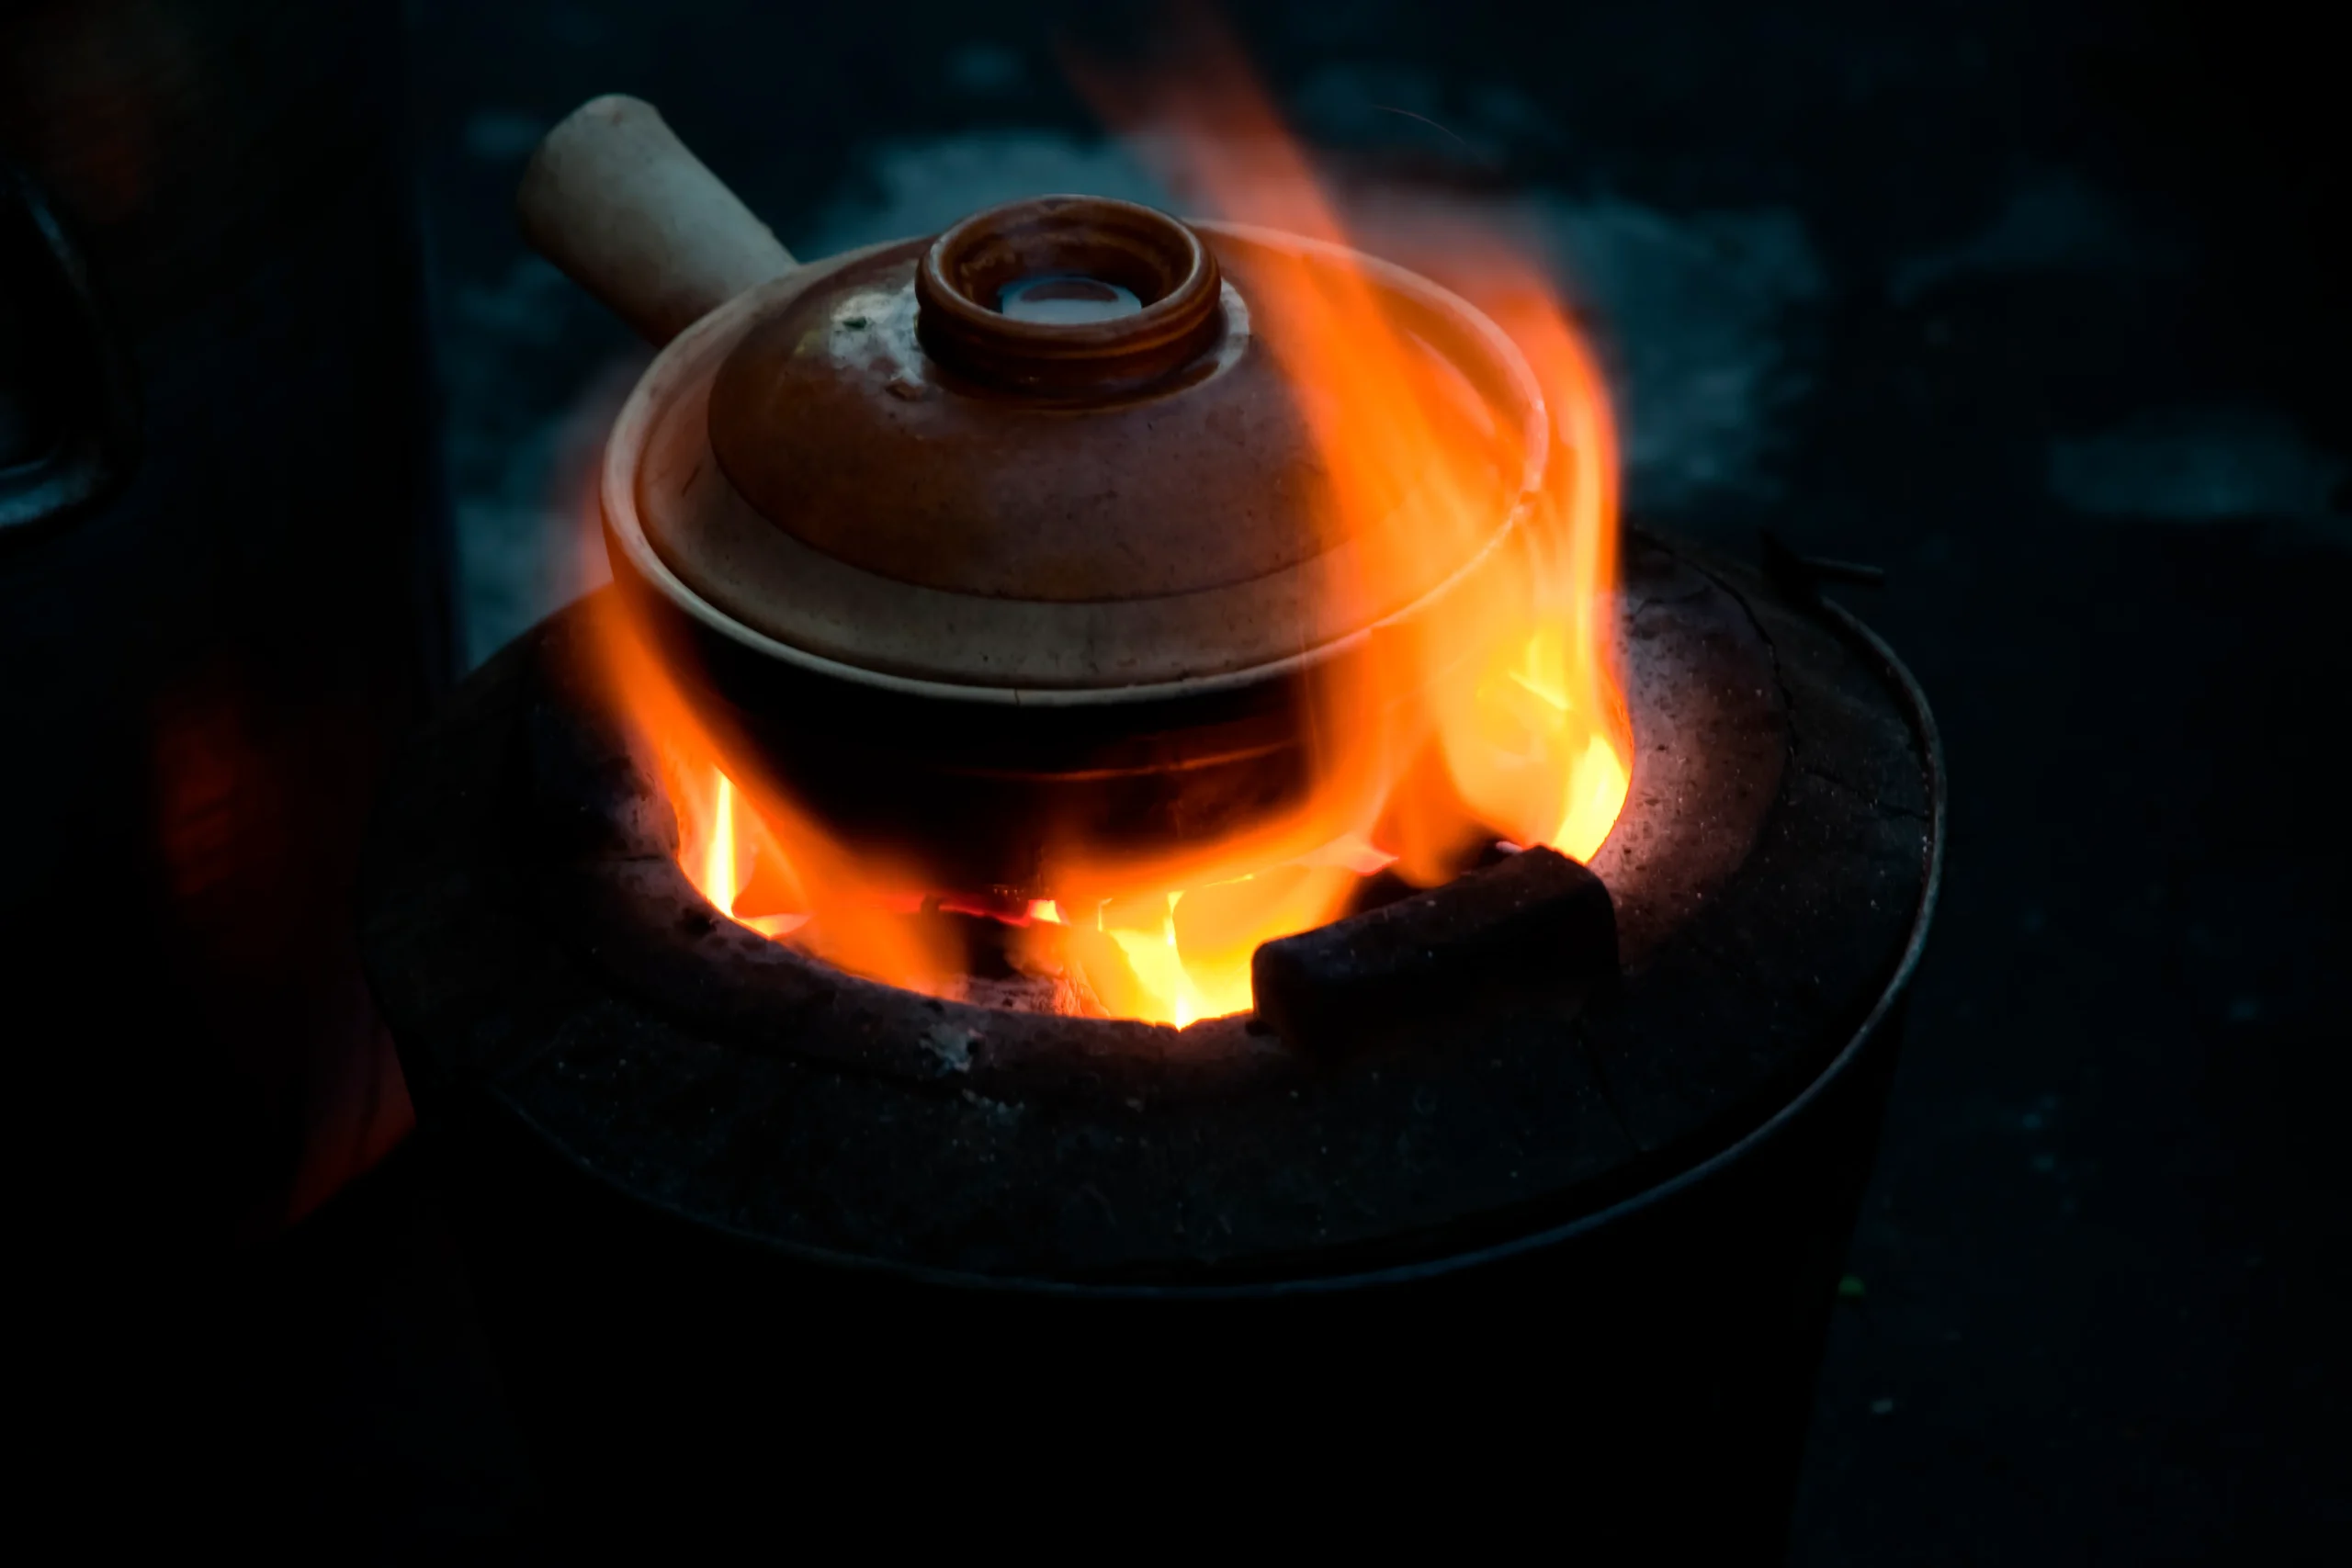 Study reveals significant overestimation of carbon savings from cookstove projects